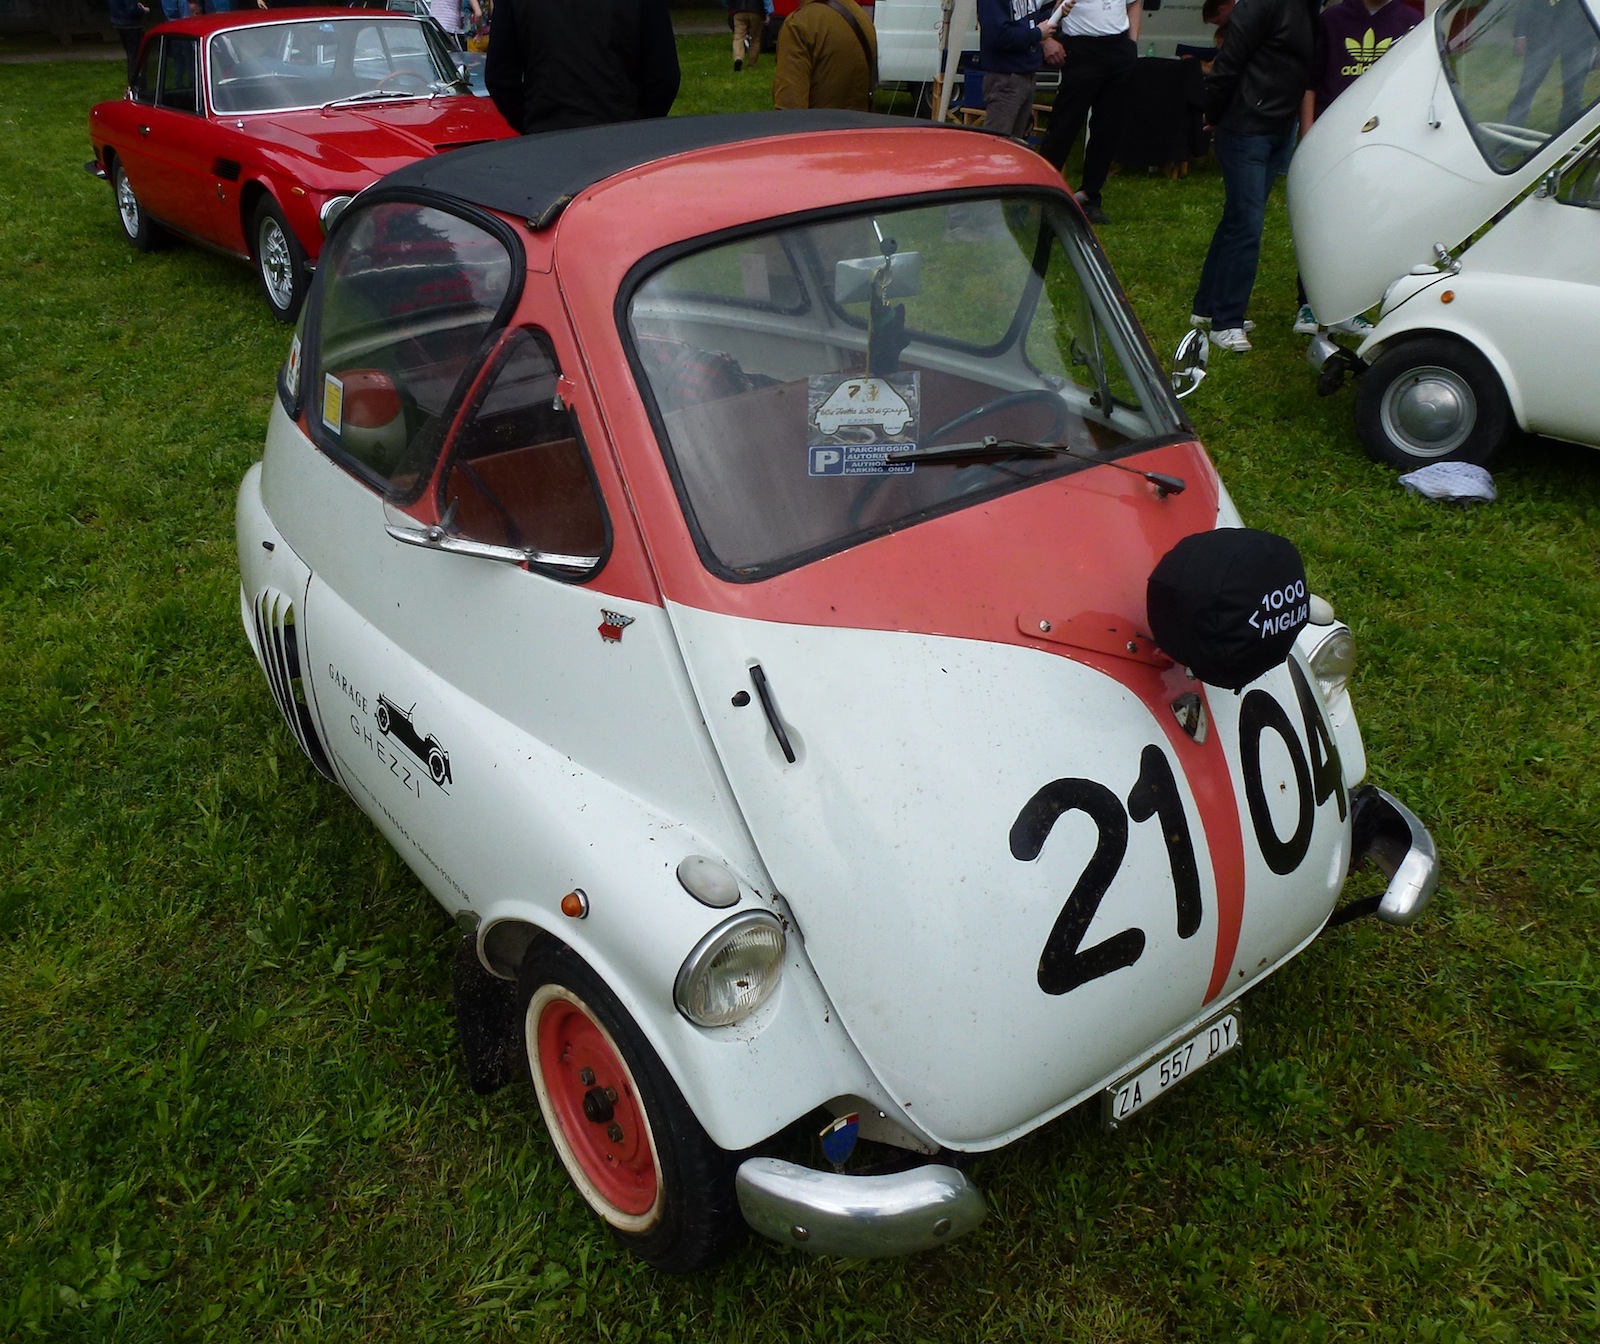 This Iso Isetta Raced In The Mille Miglia in 1954